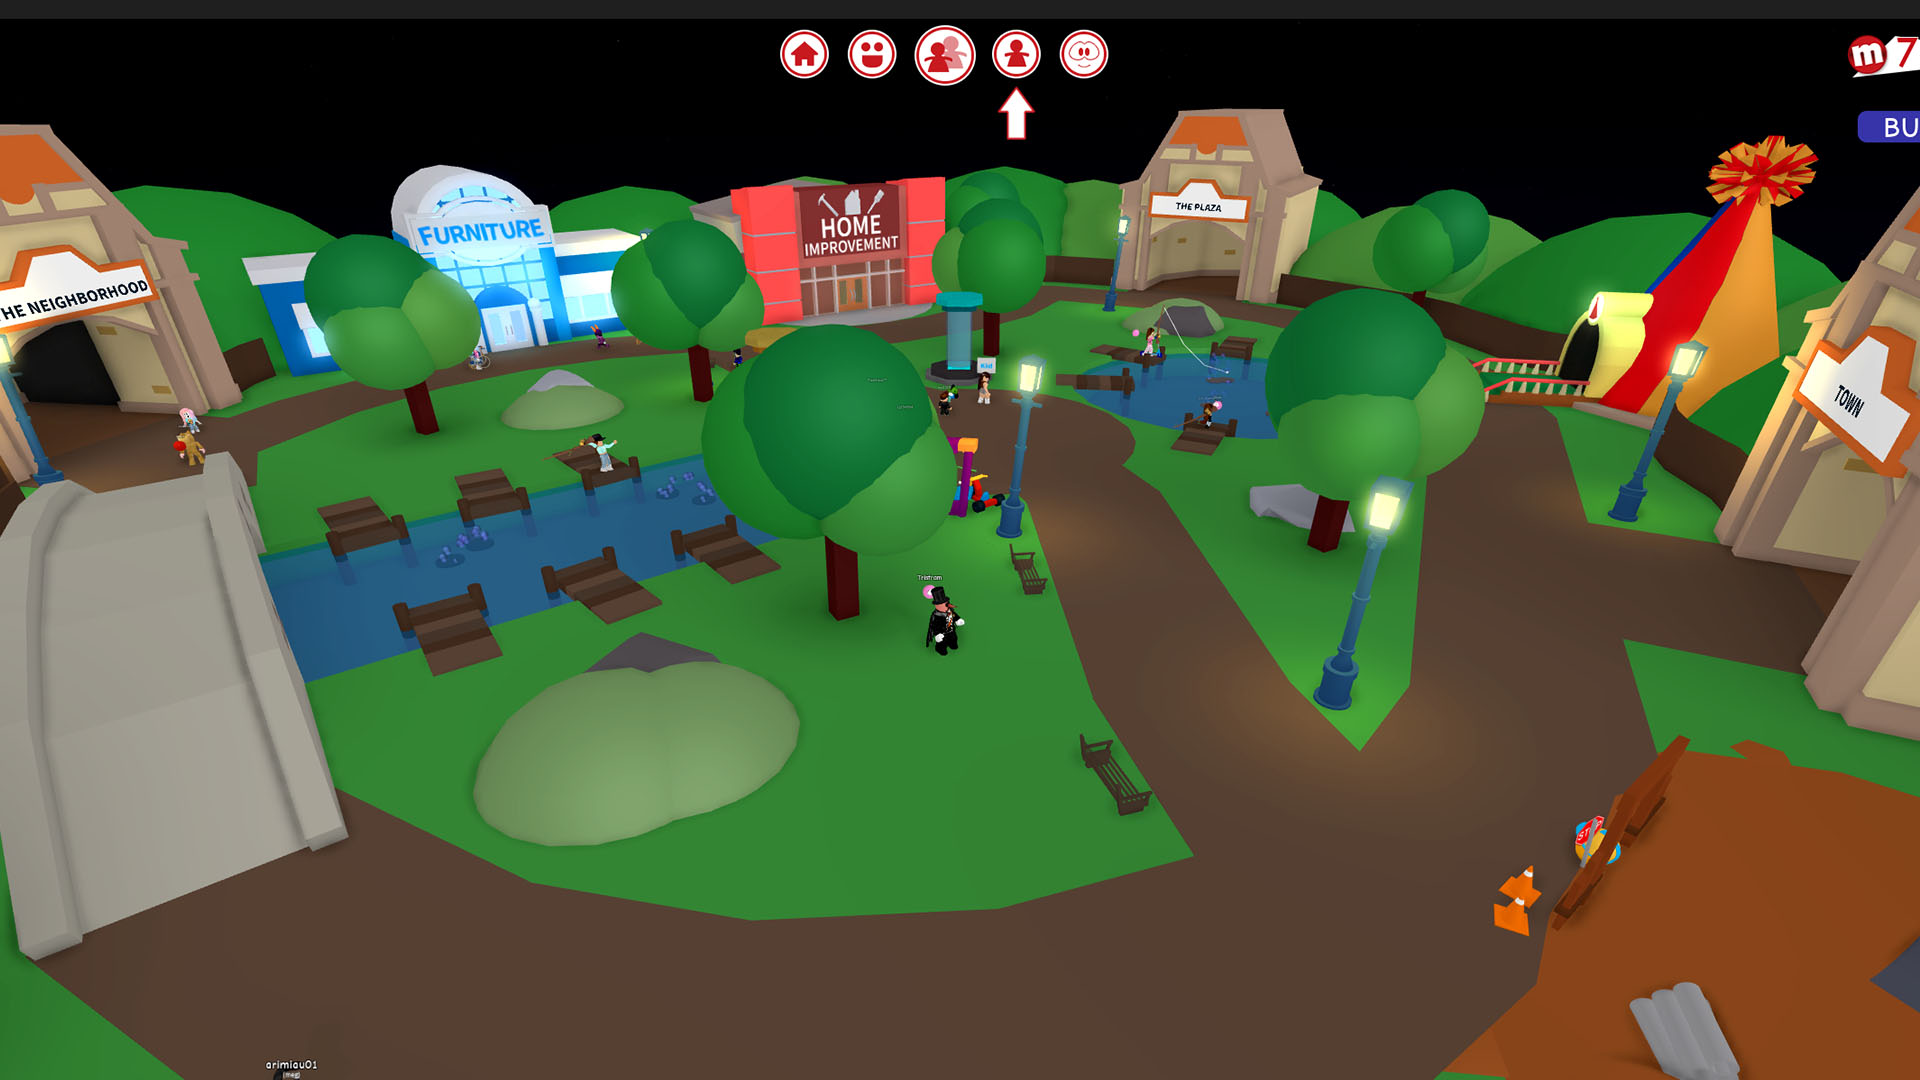 He Built This City An Interview With Alexnewtron Roblox Blog - codes on meep city in roblox